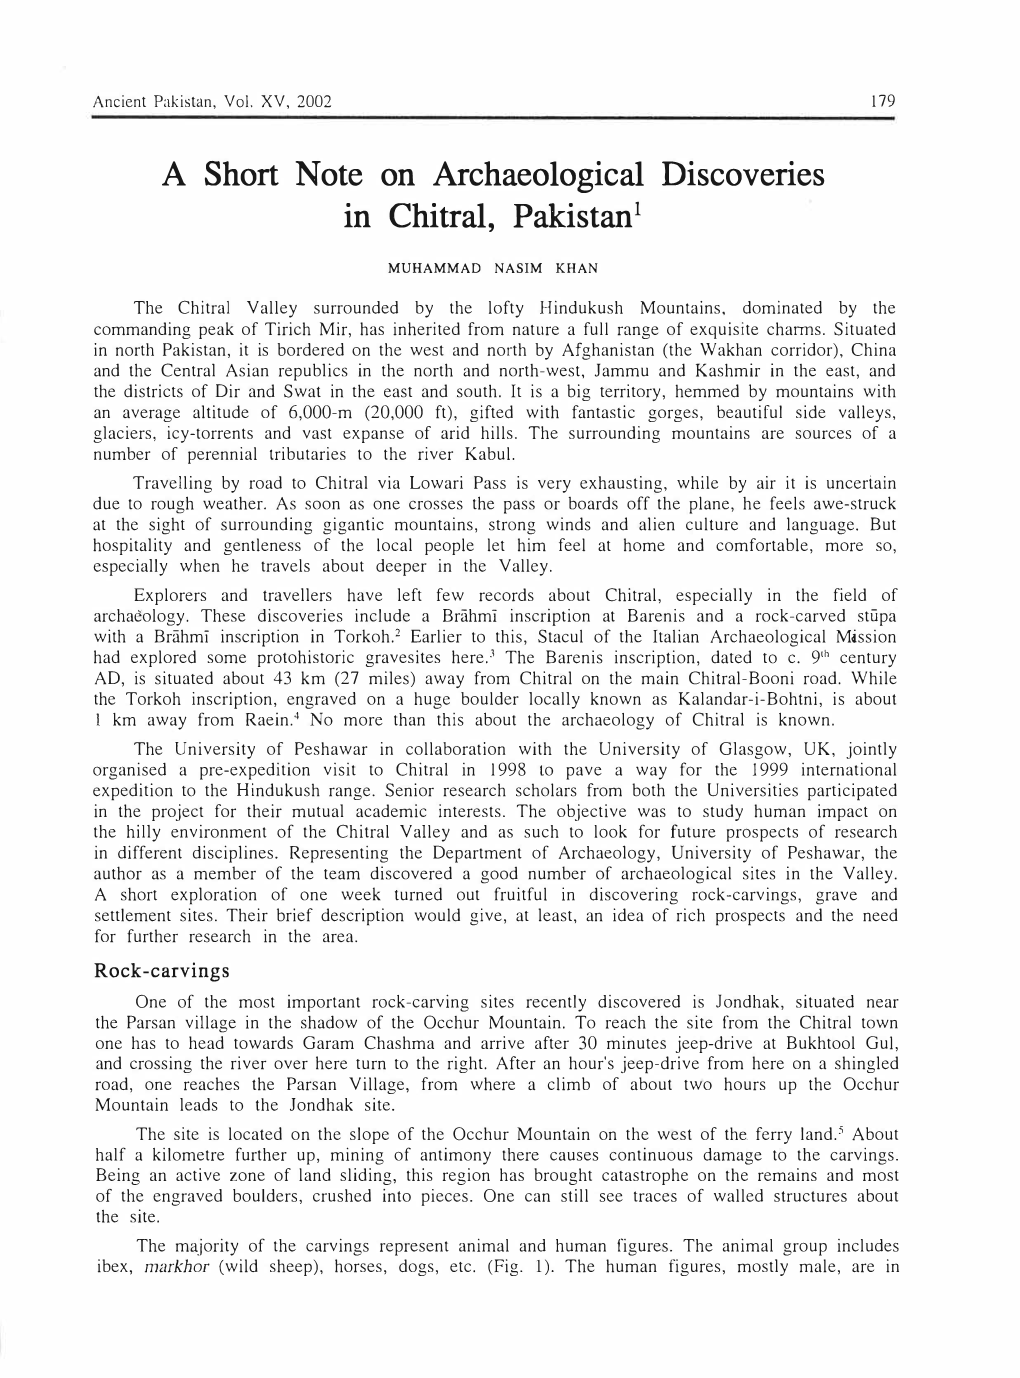 A Short Note on Archaeological Discoveries in Chitral, Pakistan 1